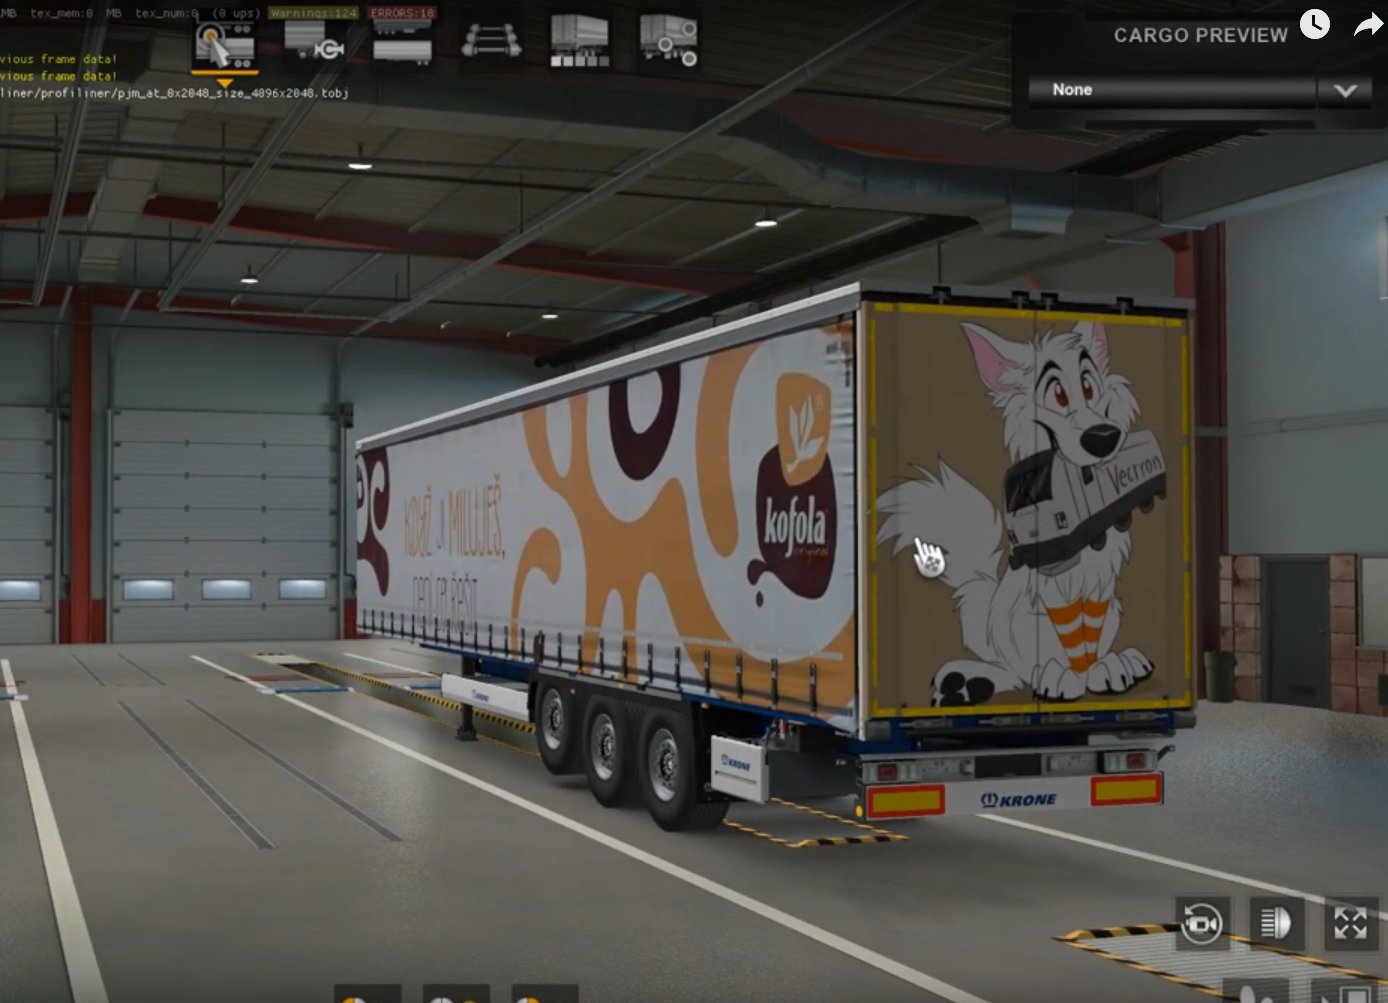 Ets2mp chat